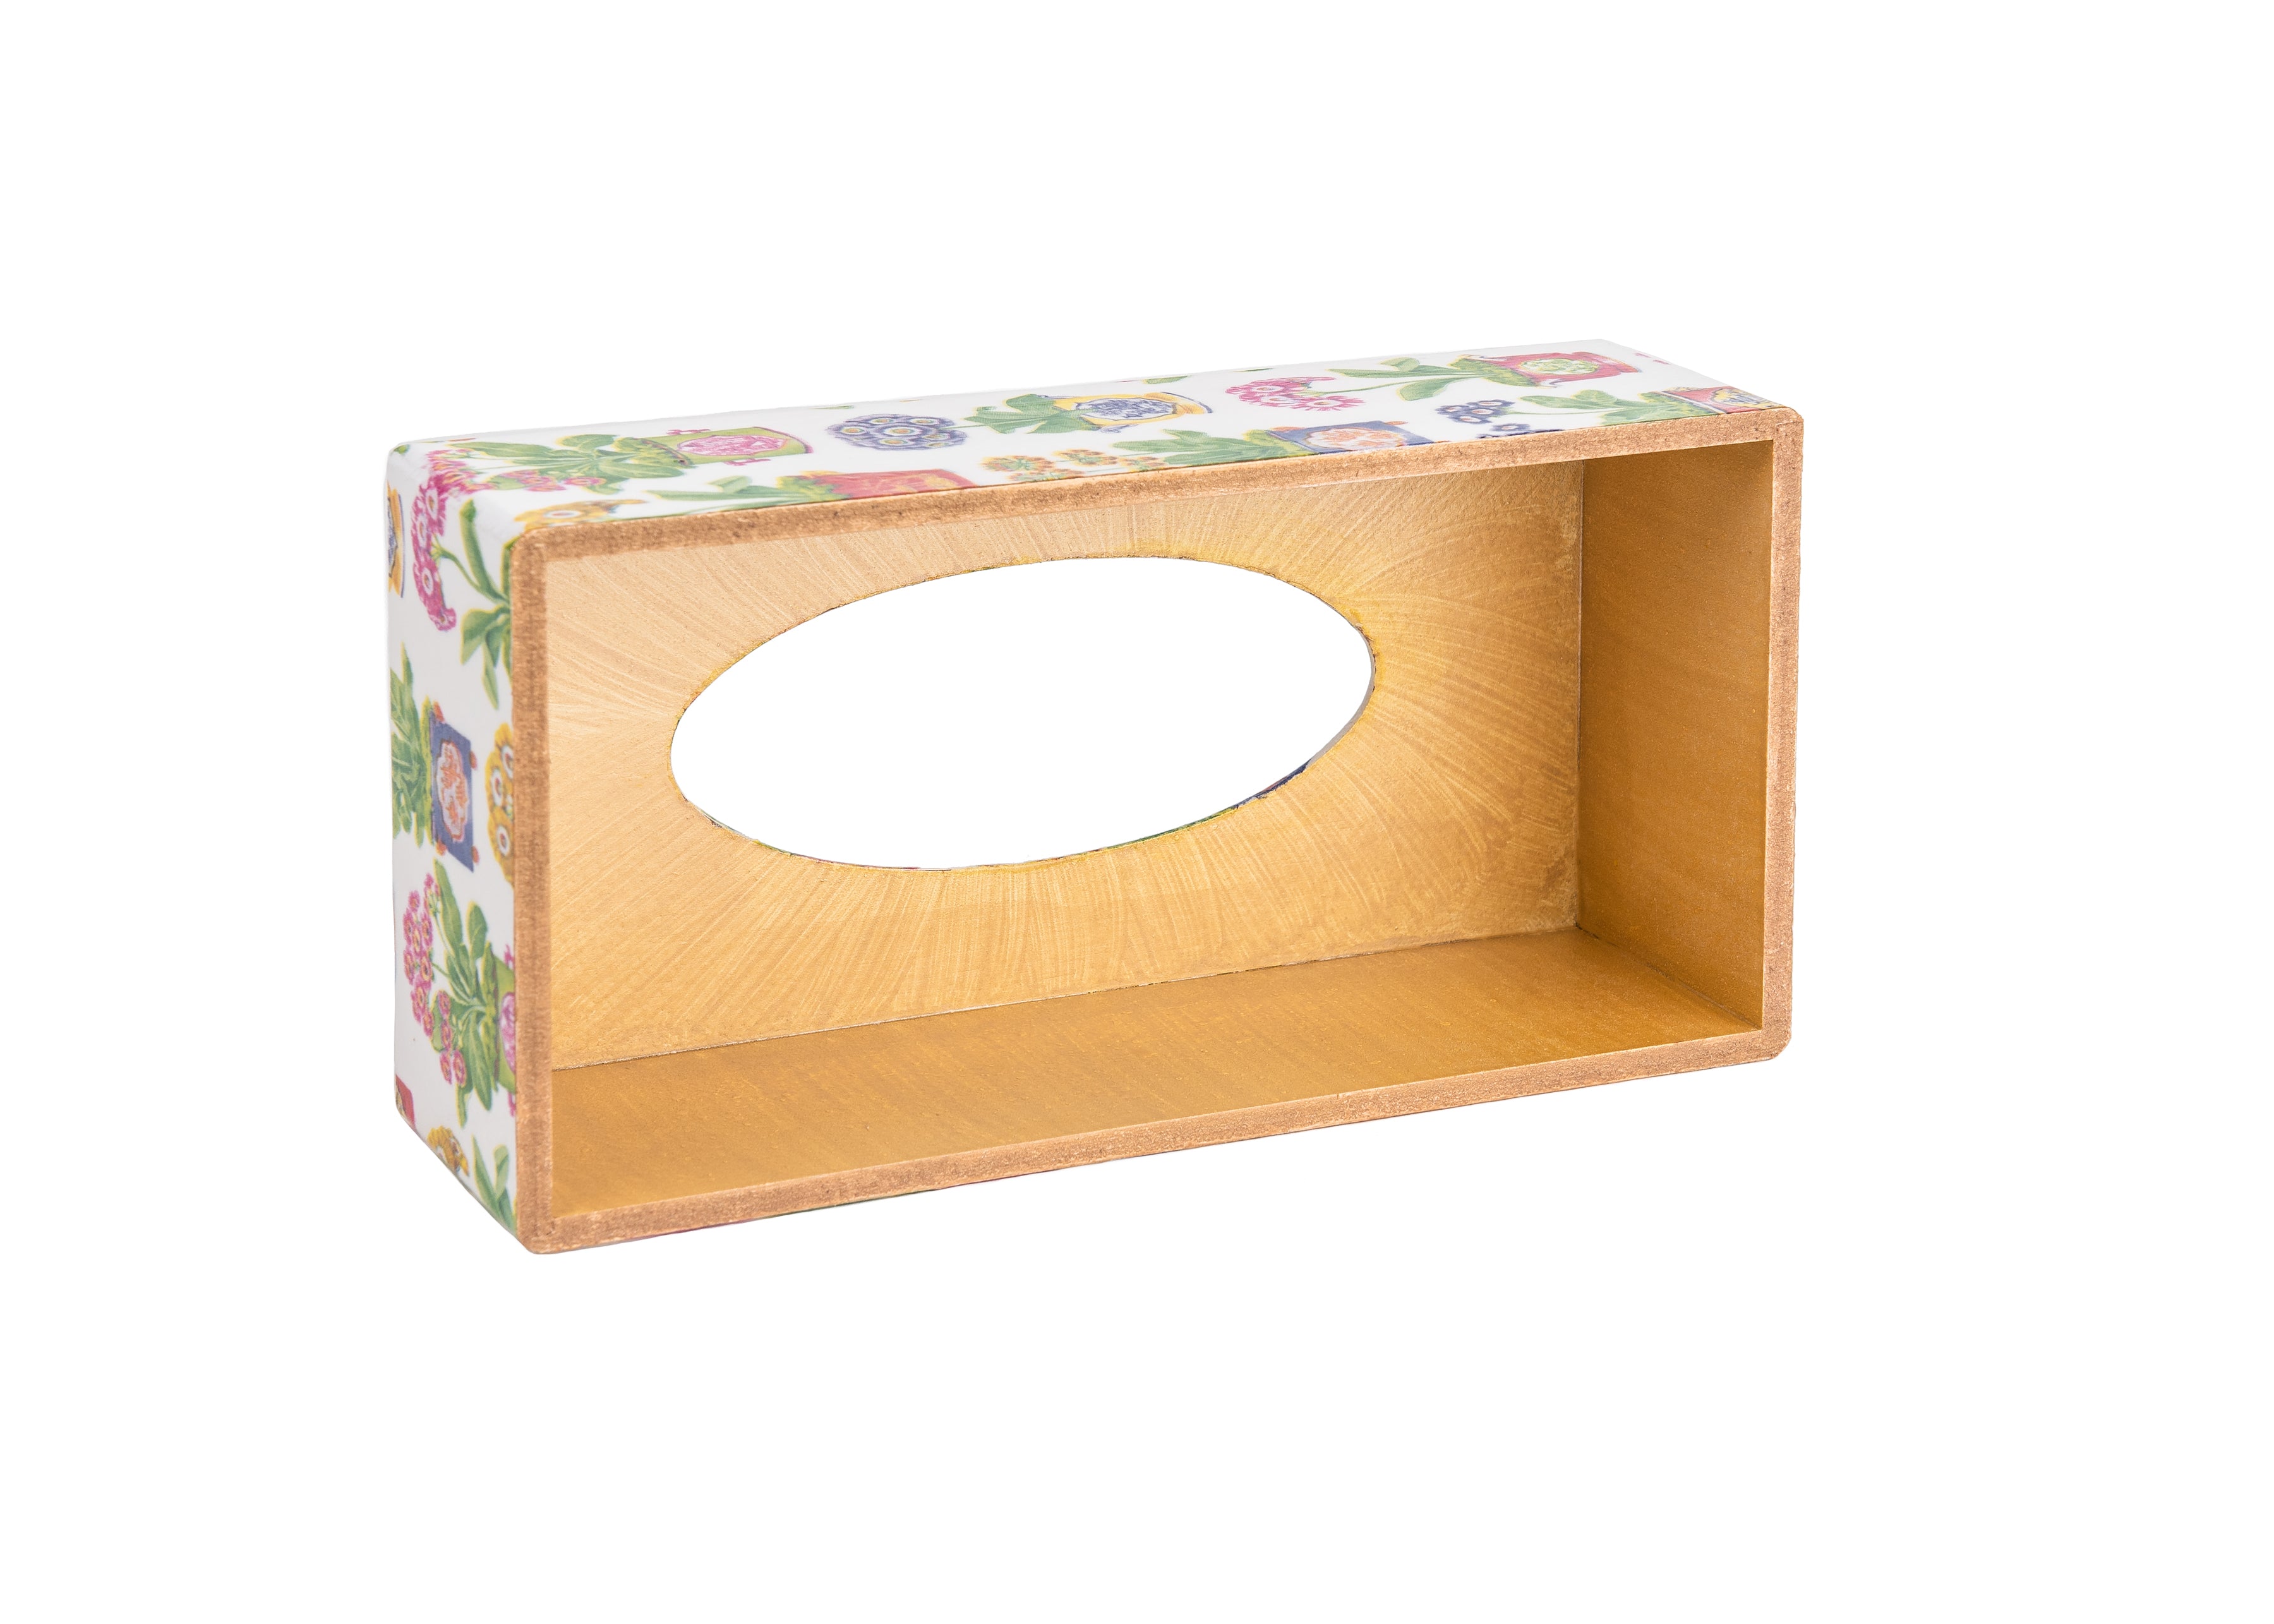 Meadow Flowers wooden tissue box cover rectangular